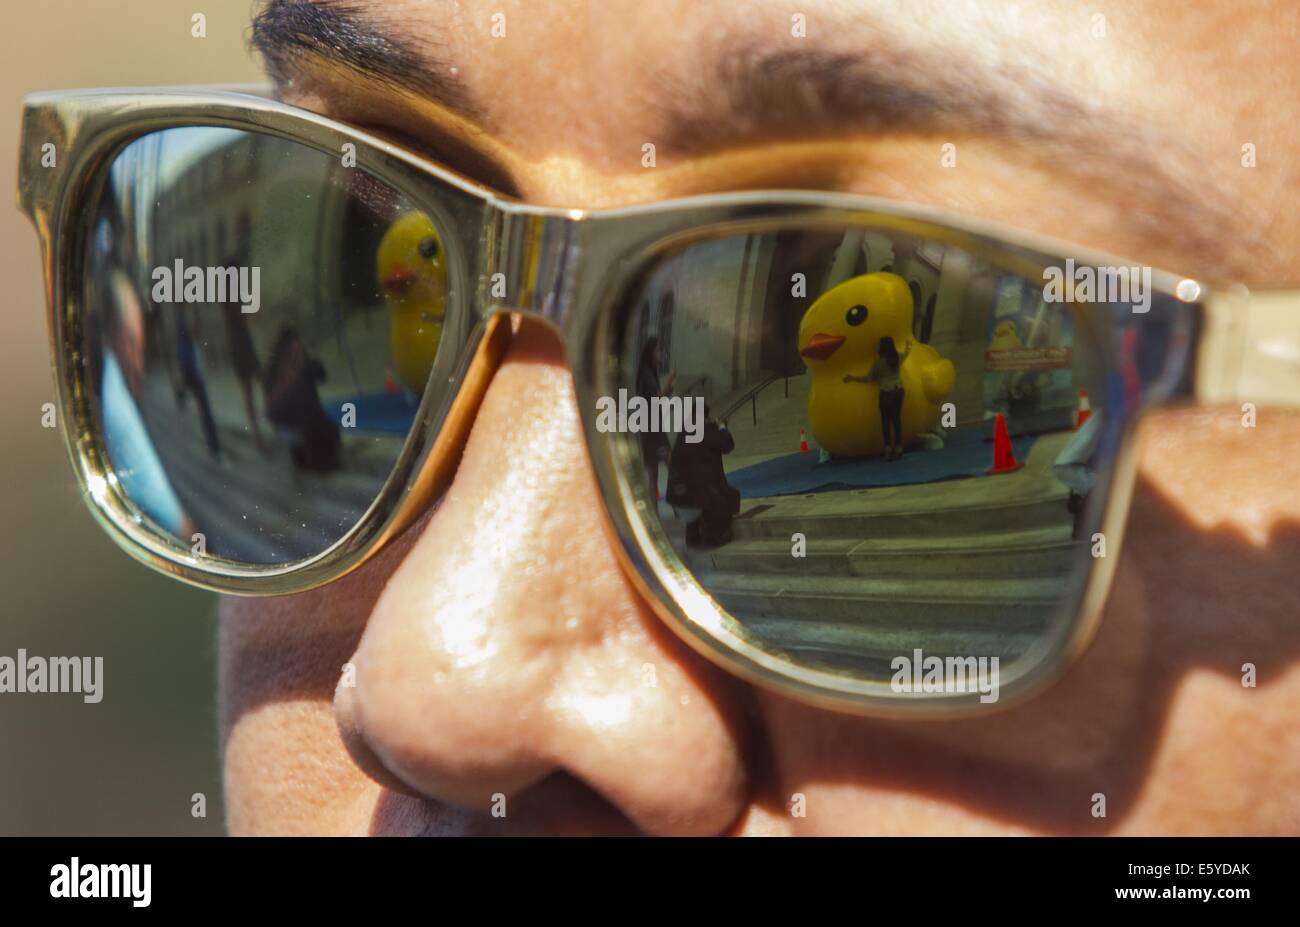 Los Angeles, California, USA. 8th Aug, 2014. People take pictures with a 10-foot-tall rubber ducky ''baby duck'' are reflected on a glasses, on the Spring Street steps of Los Angeles City Hall on Friday, Aug. 8, 2014, in Los Angeles. The bright yellow, inflatable ducky is wandering the city in search of its mother, a 60 feet high and dubbed by event organizers as the world's largest rubber ducky as part of a promotional stunt for the Tall Ships Festival taking place Aug. 20-24 at the Port of Los Angeles. Credit:  Ringo Chiu/ZUMA Wire/Alamy Live News Stock Photo